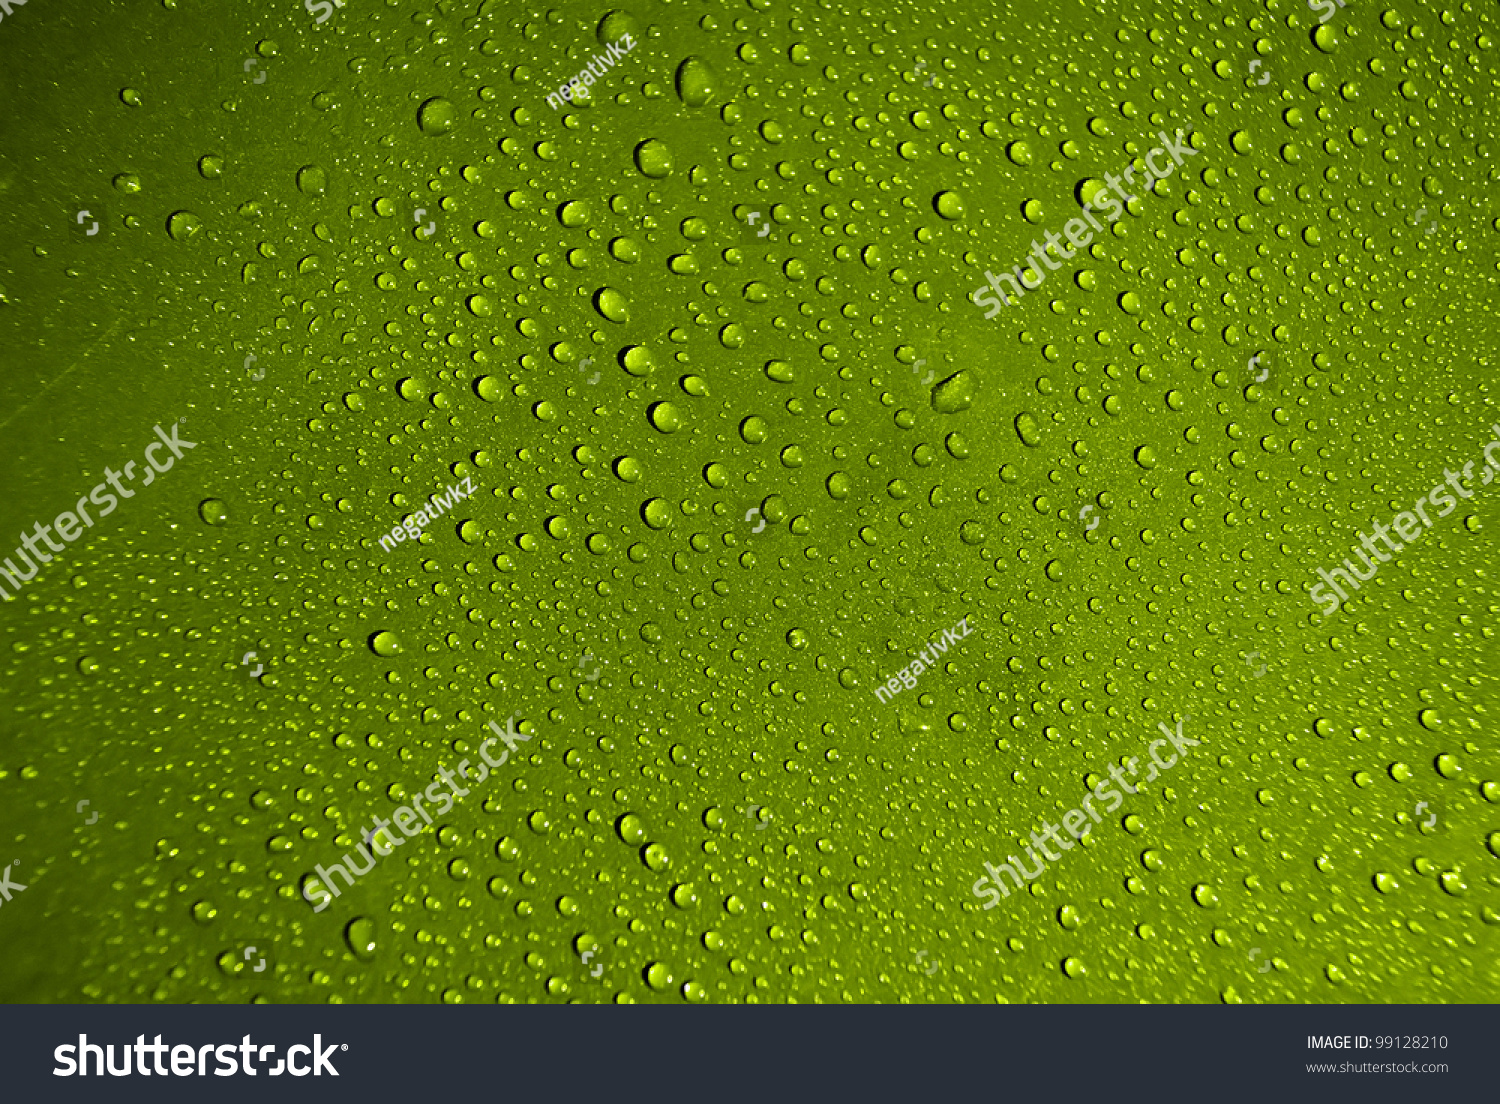 Crystal Clear Water Drops Over Blue Background. Stock Photo 99128210 ...